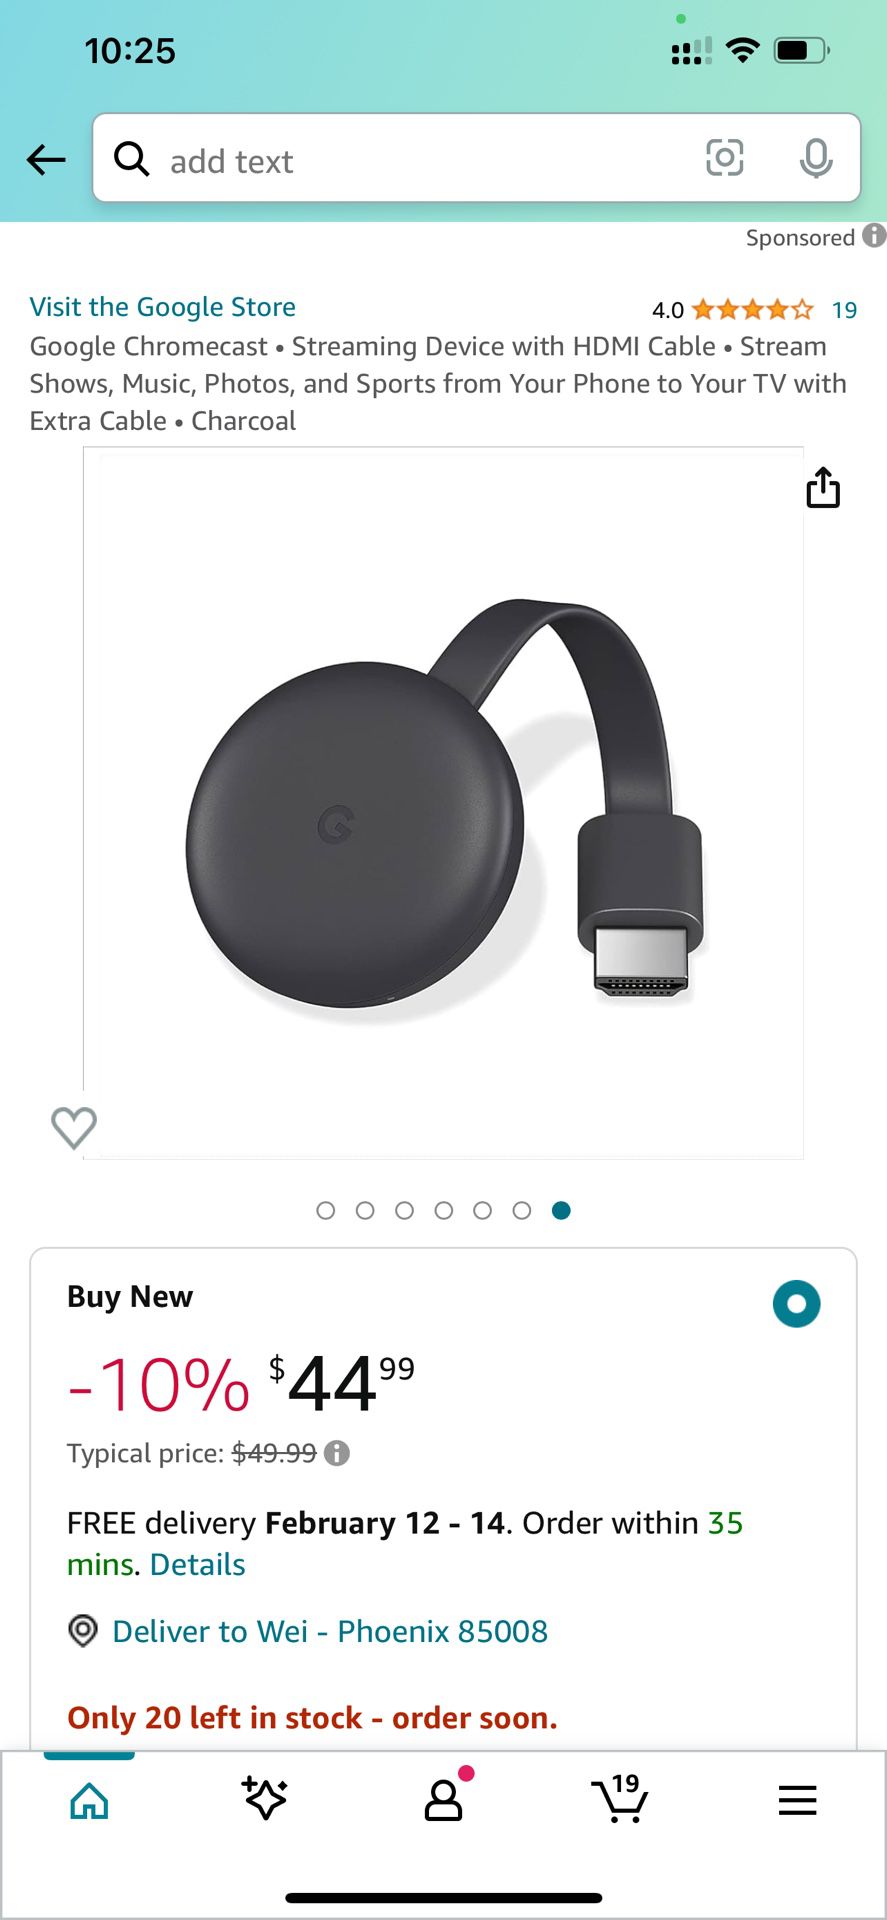 Google Chromecast • Streaming Device with HDMI Cable • Stream Shows, Music, Photos, and Sports from Your Phone to Your TV with Extra Cable • Charcoal